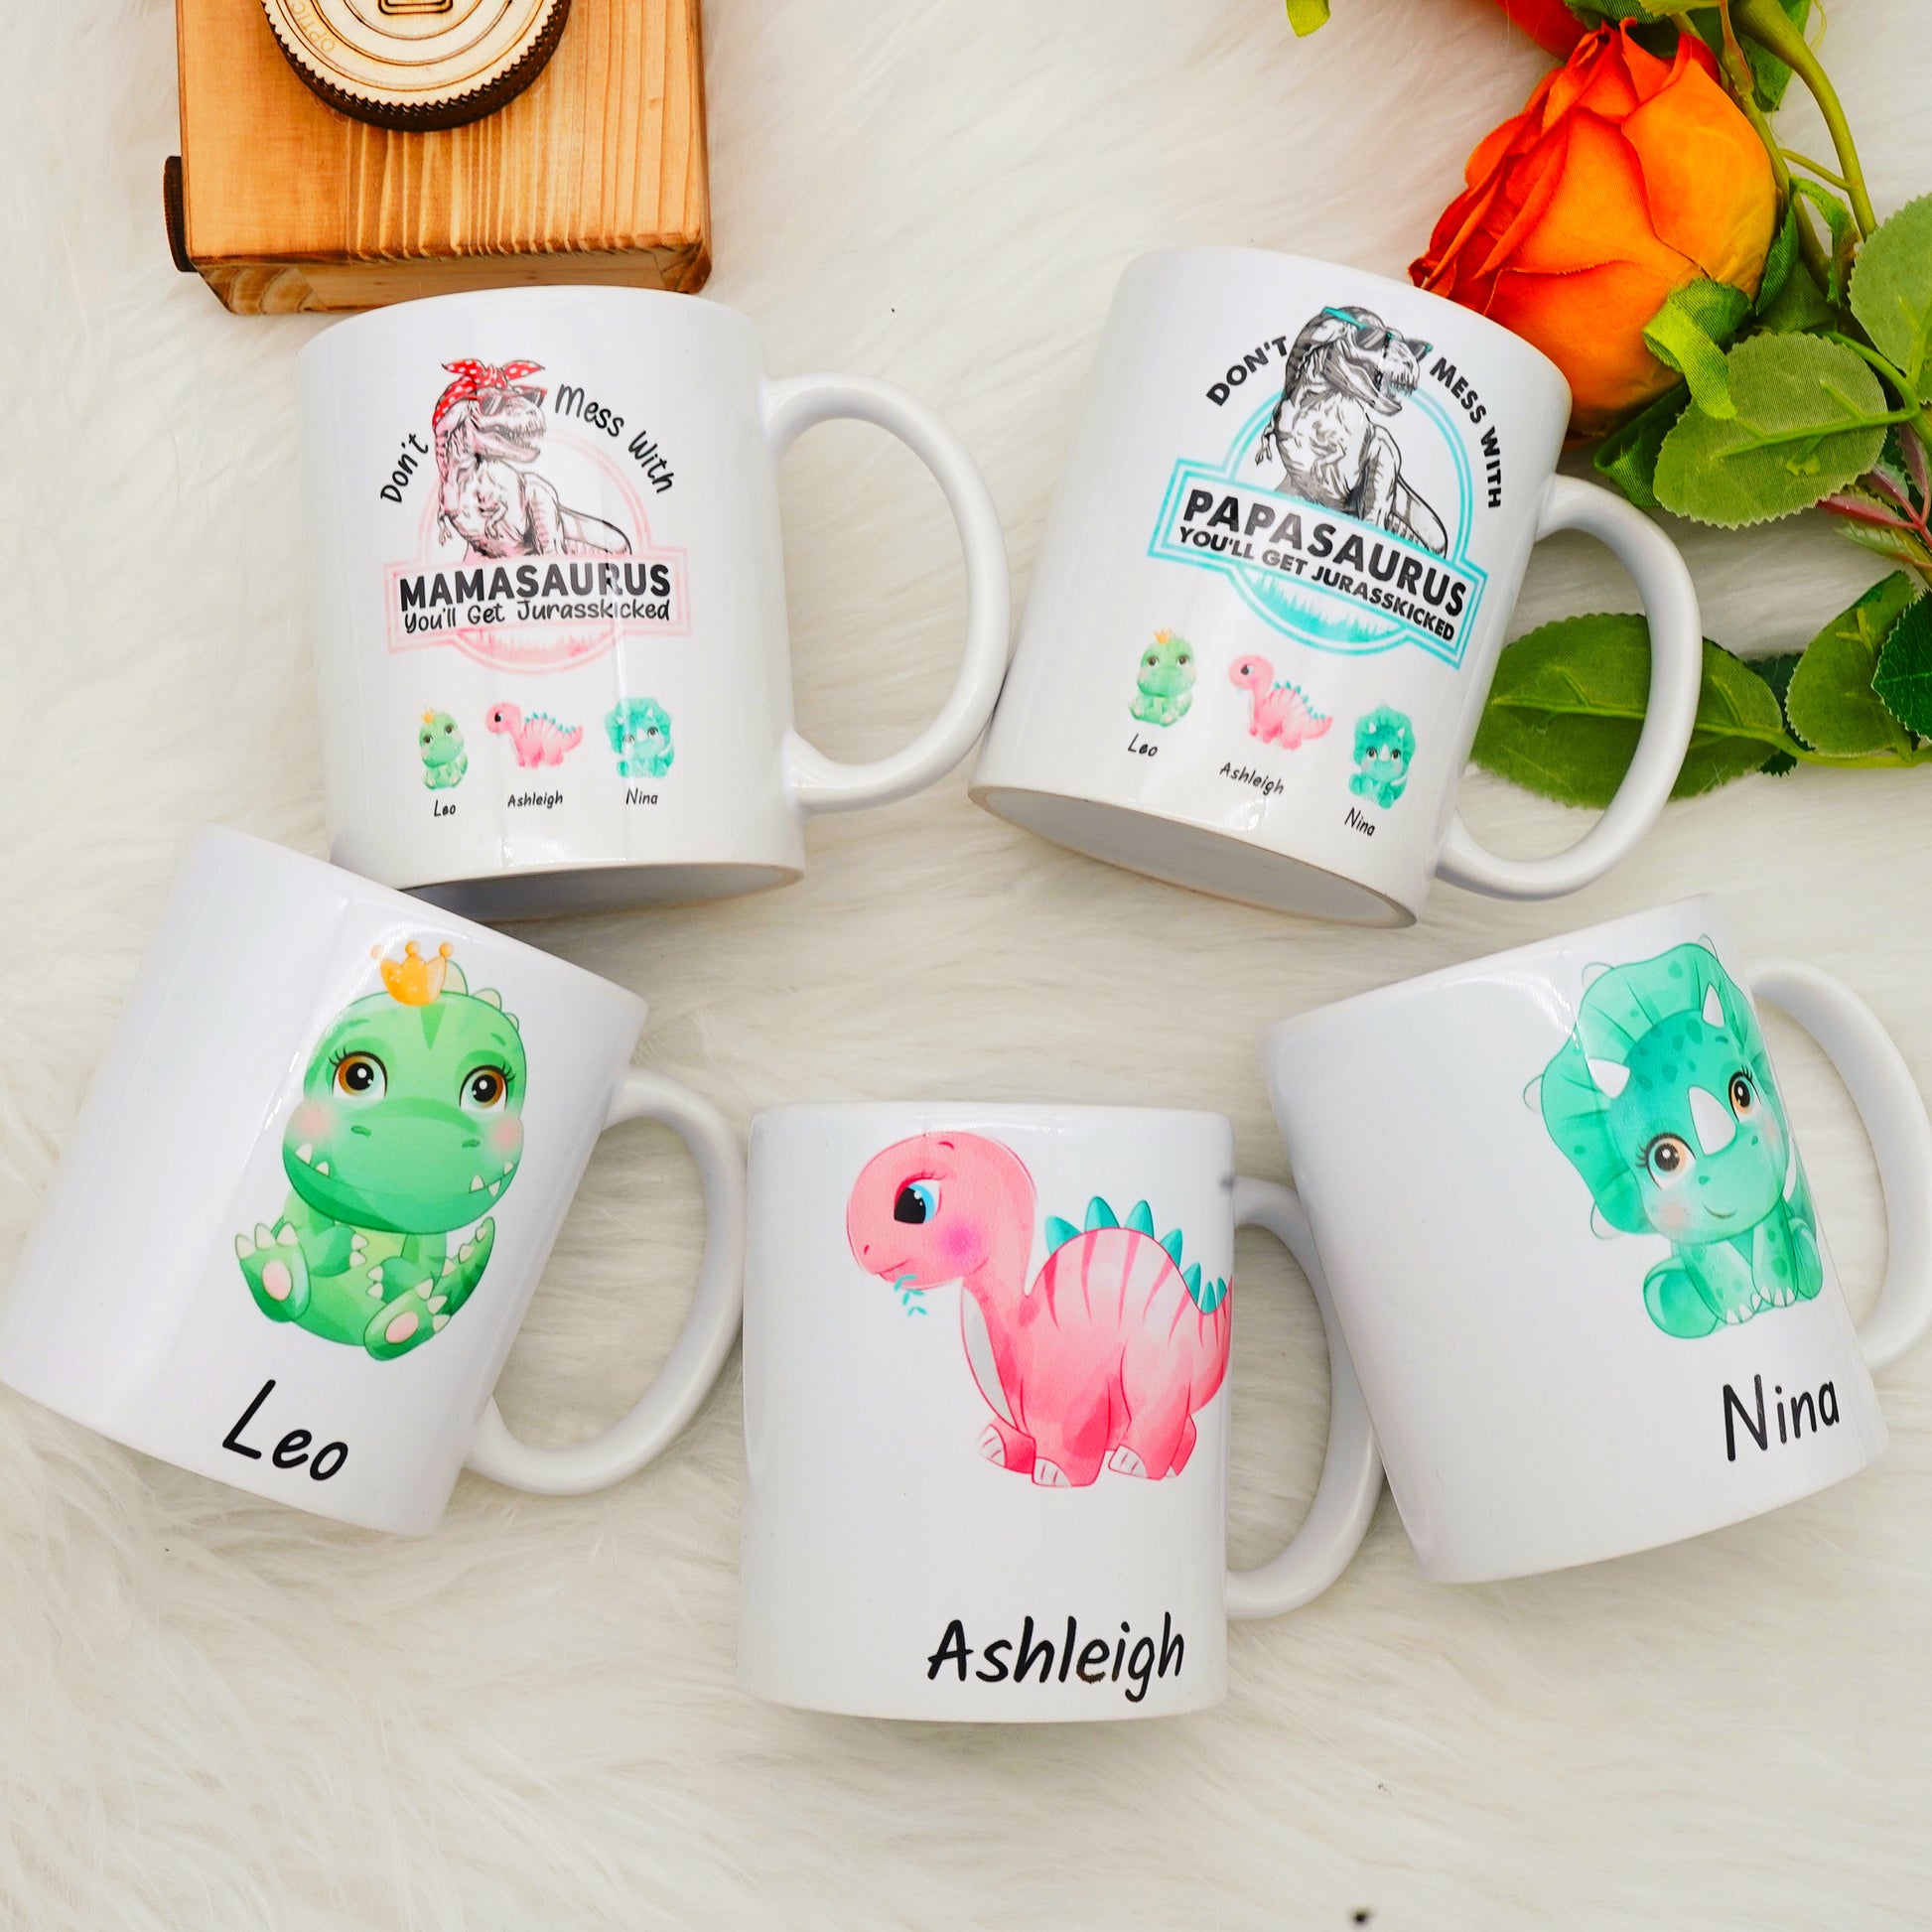 Don't Mess with Mamasaurus You'll Get Jurasskicked Mug Mamasaurus Cup  Mamasaurus Coffee Mug Birthday…See more Don't Mess with Mamasaurus You'll  Get